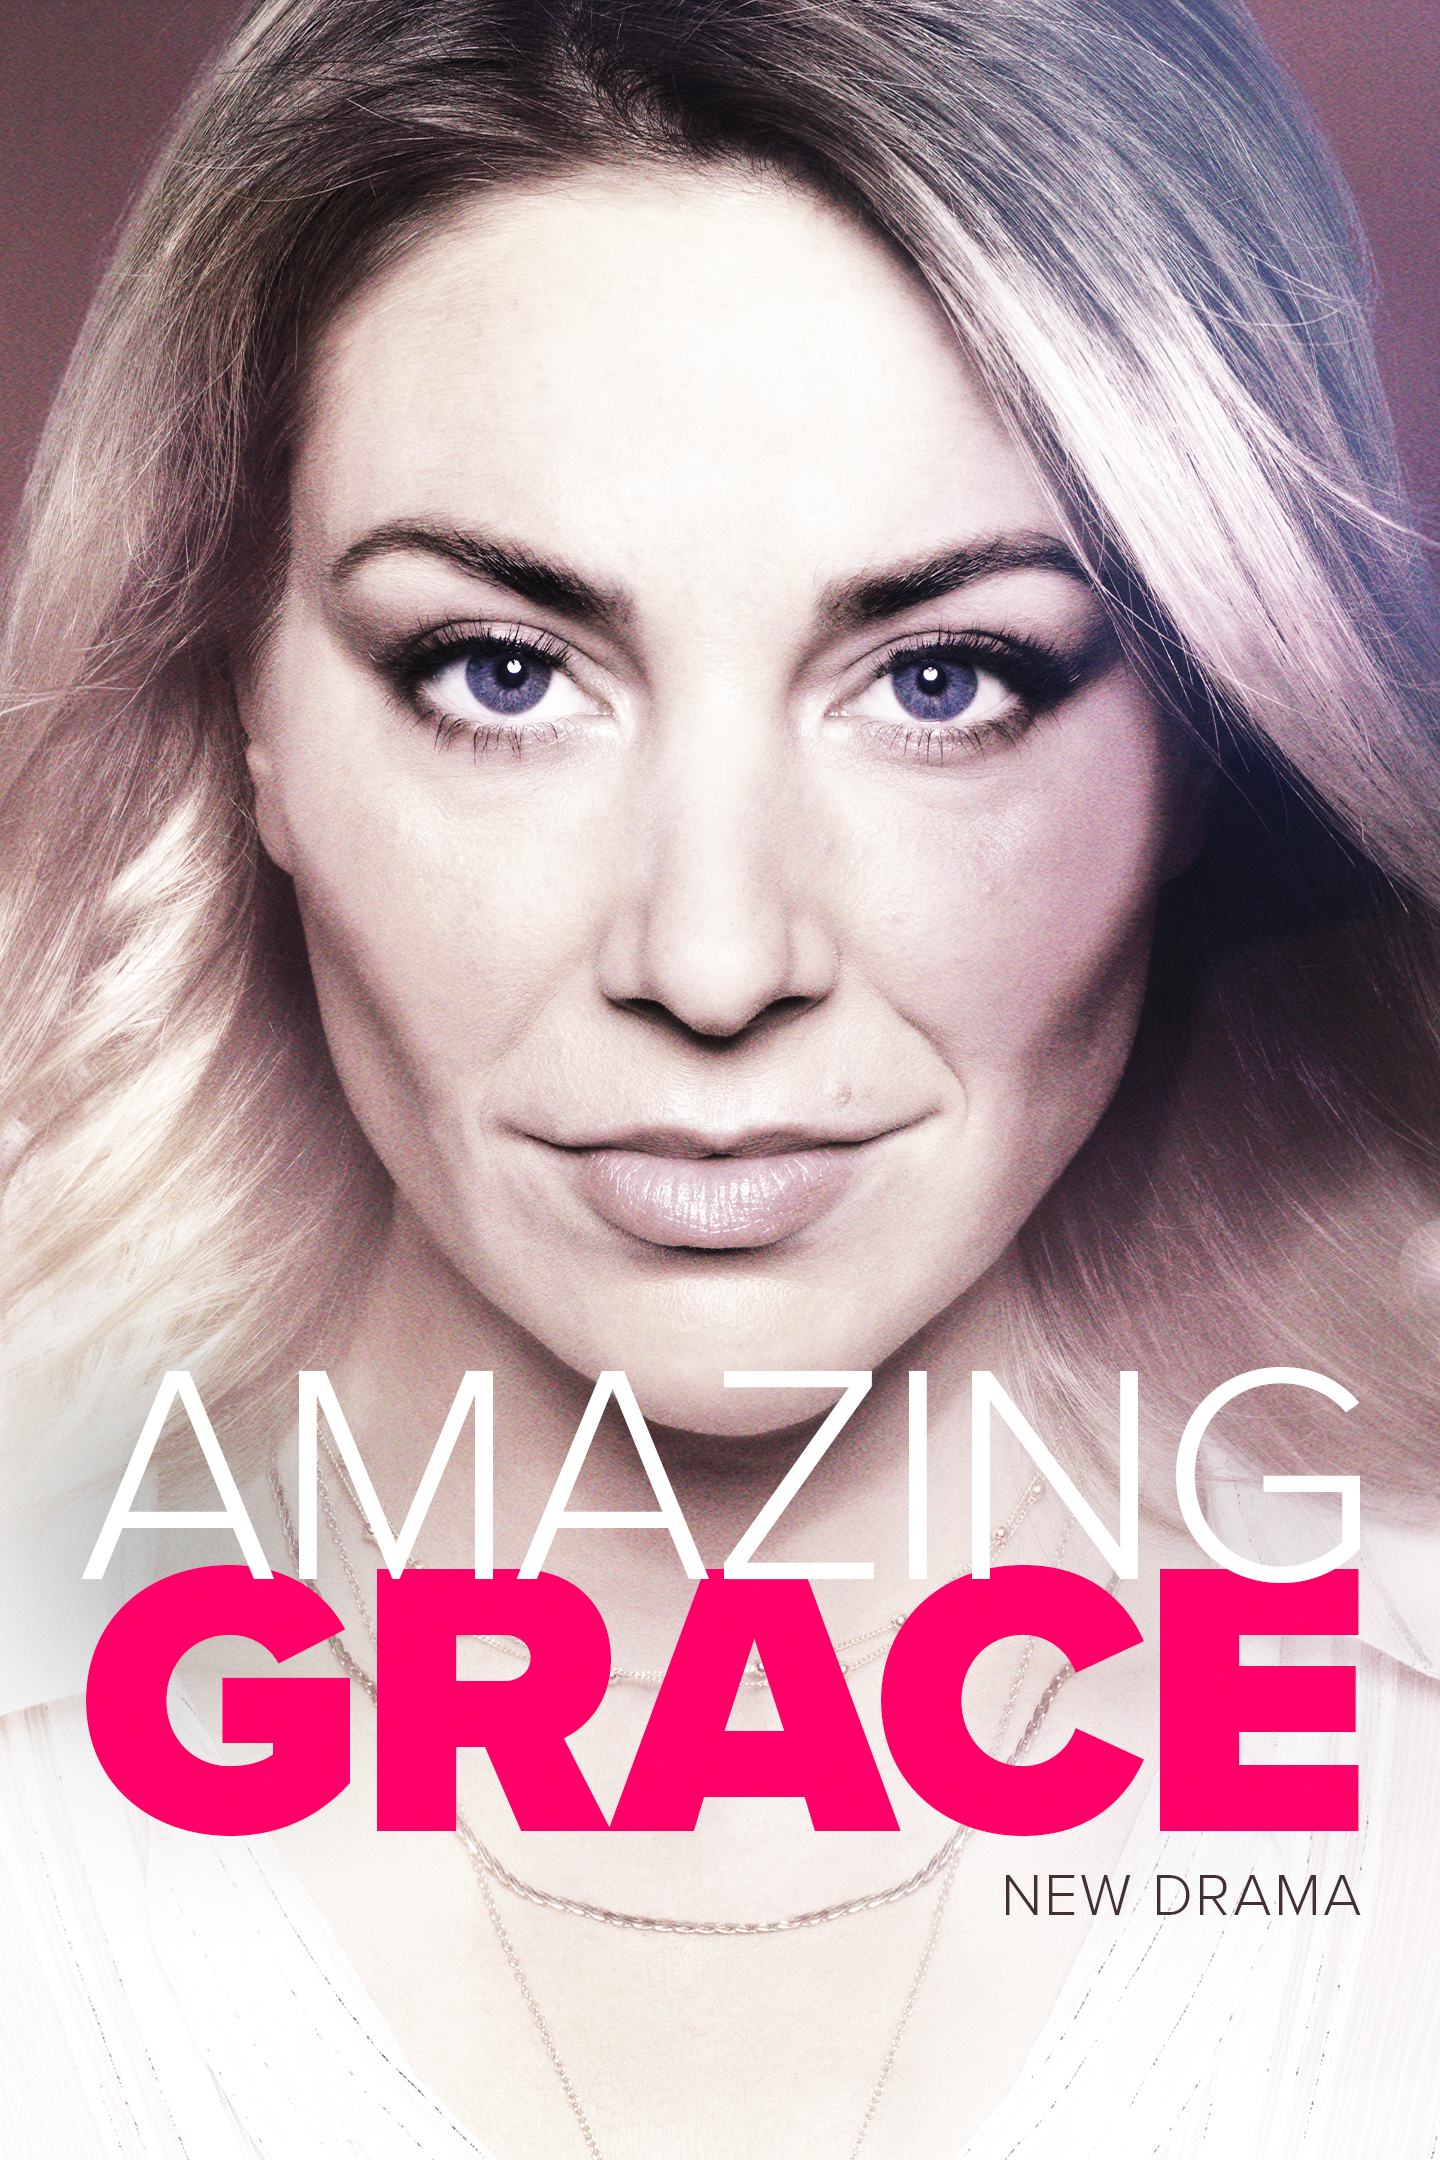 AMAZING GRACE PREMIERES WEDNESDAY 3 MARCH AT 9.00 PM ON NINE